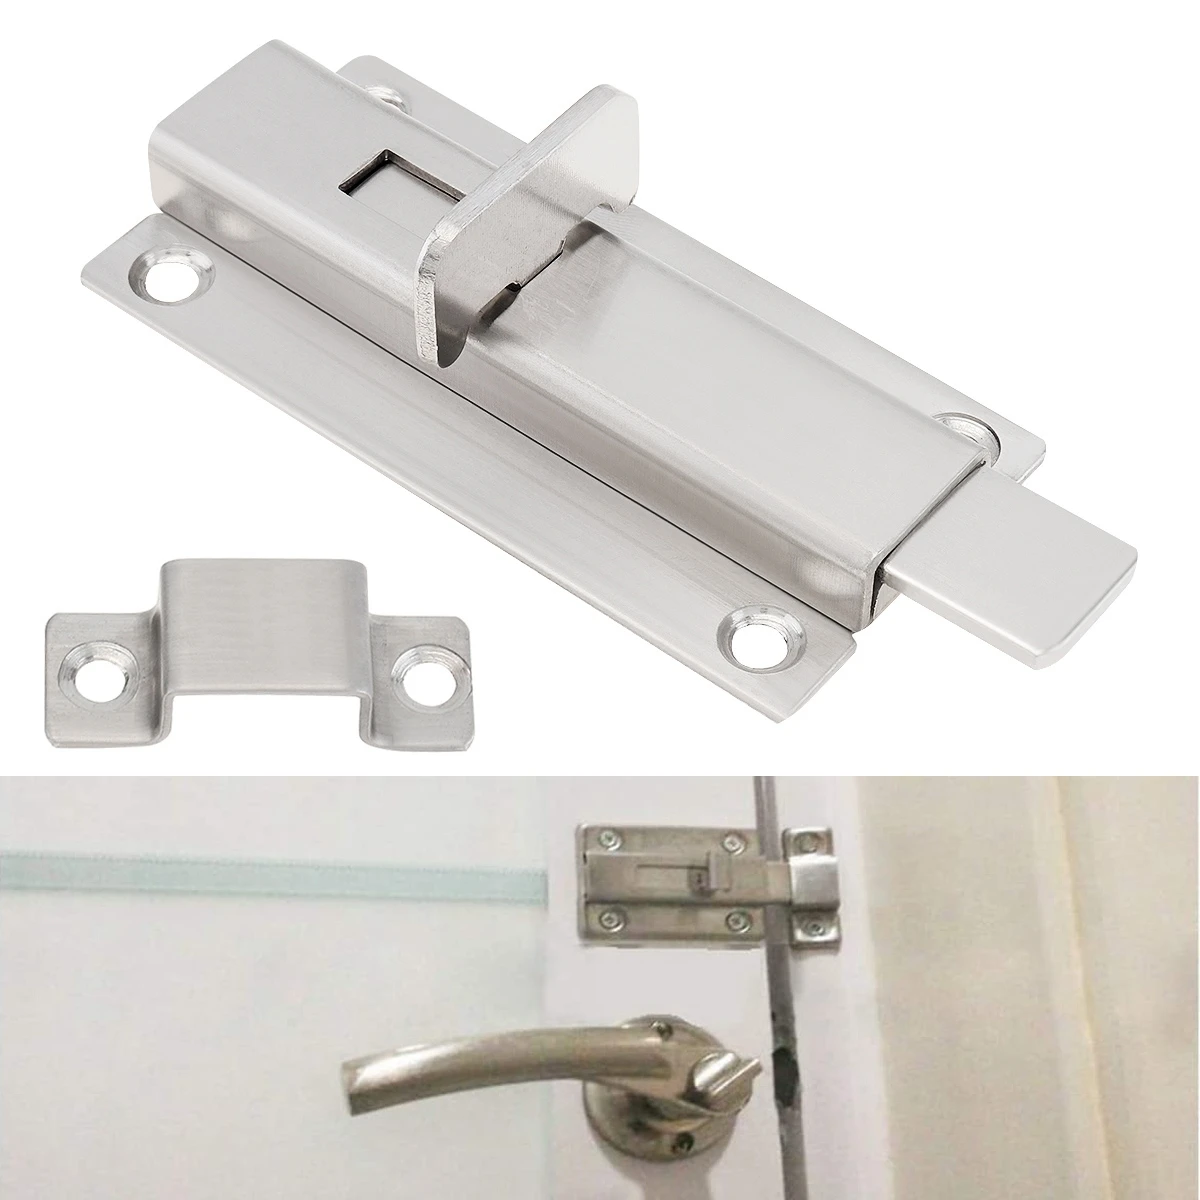 

4inch Stainless Steel Door Bolts Latch Sliding Door Lock Surface Mounted Slide Bolt for All Types of Internal Doors